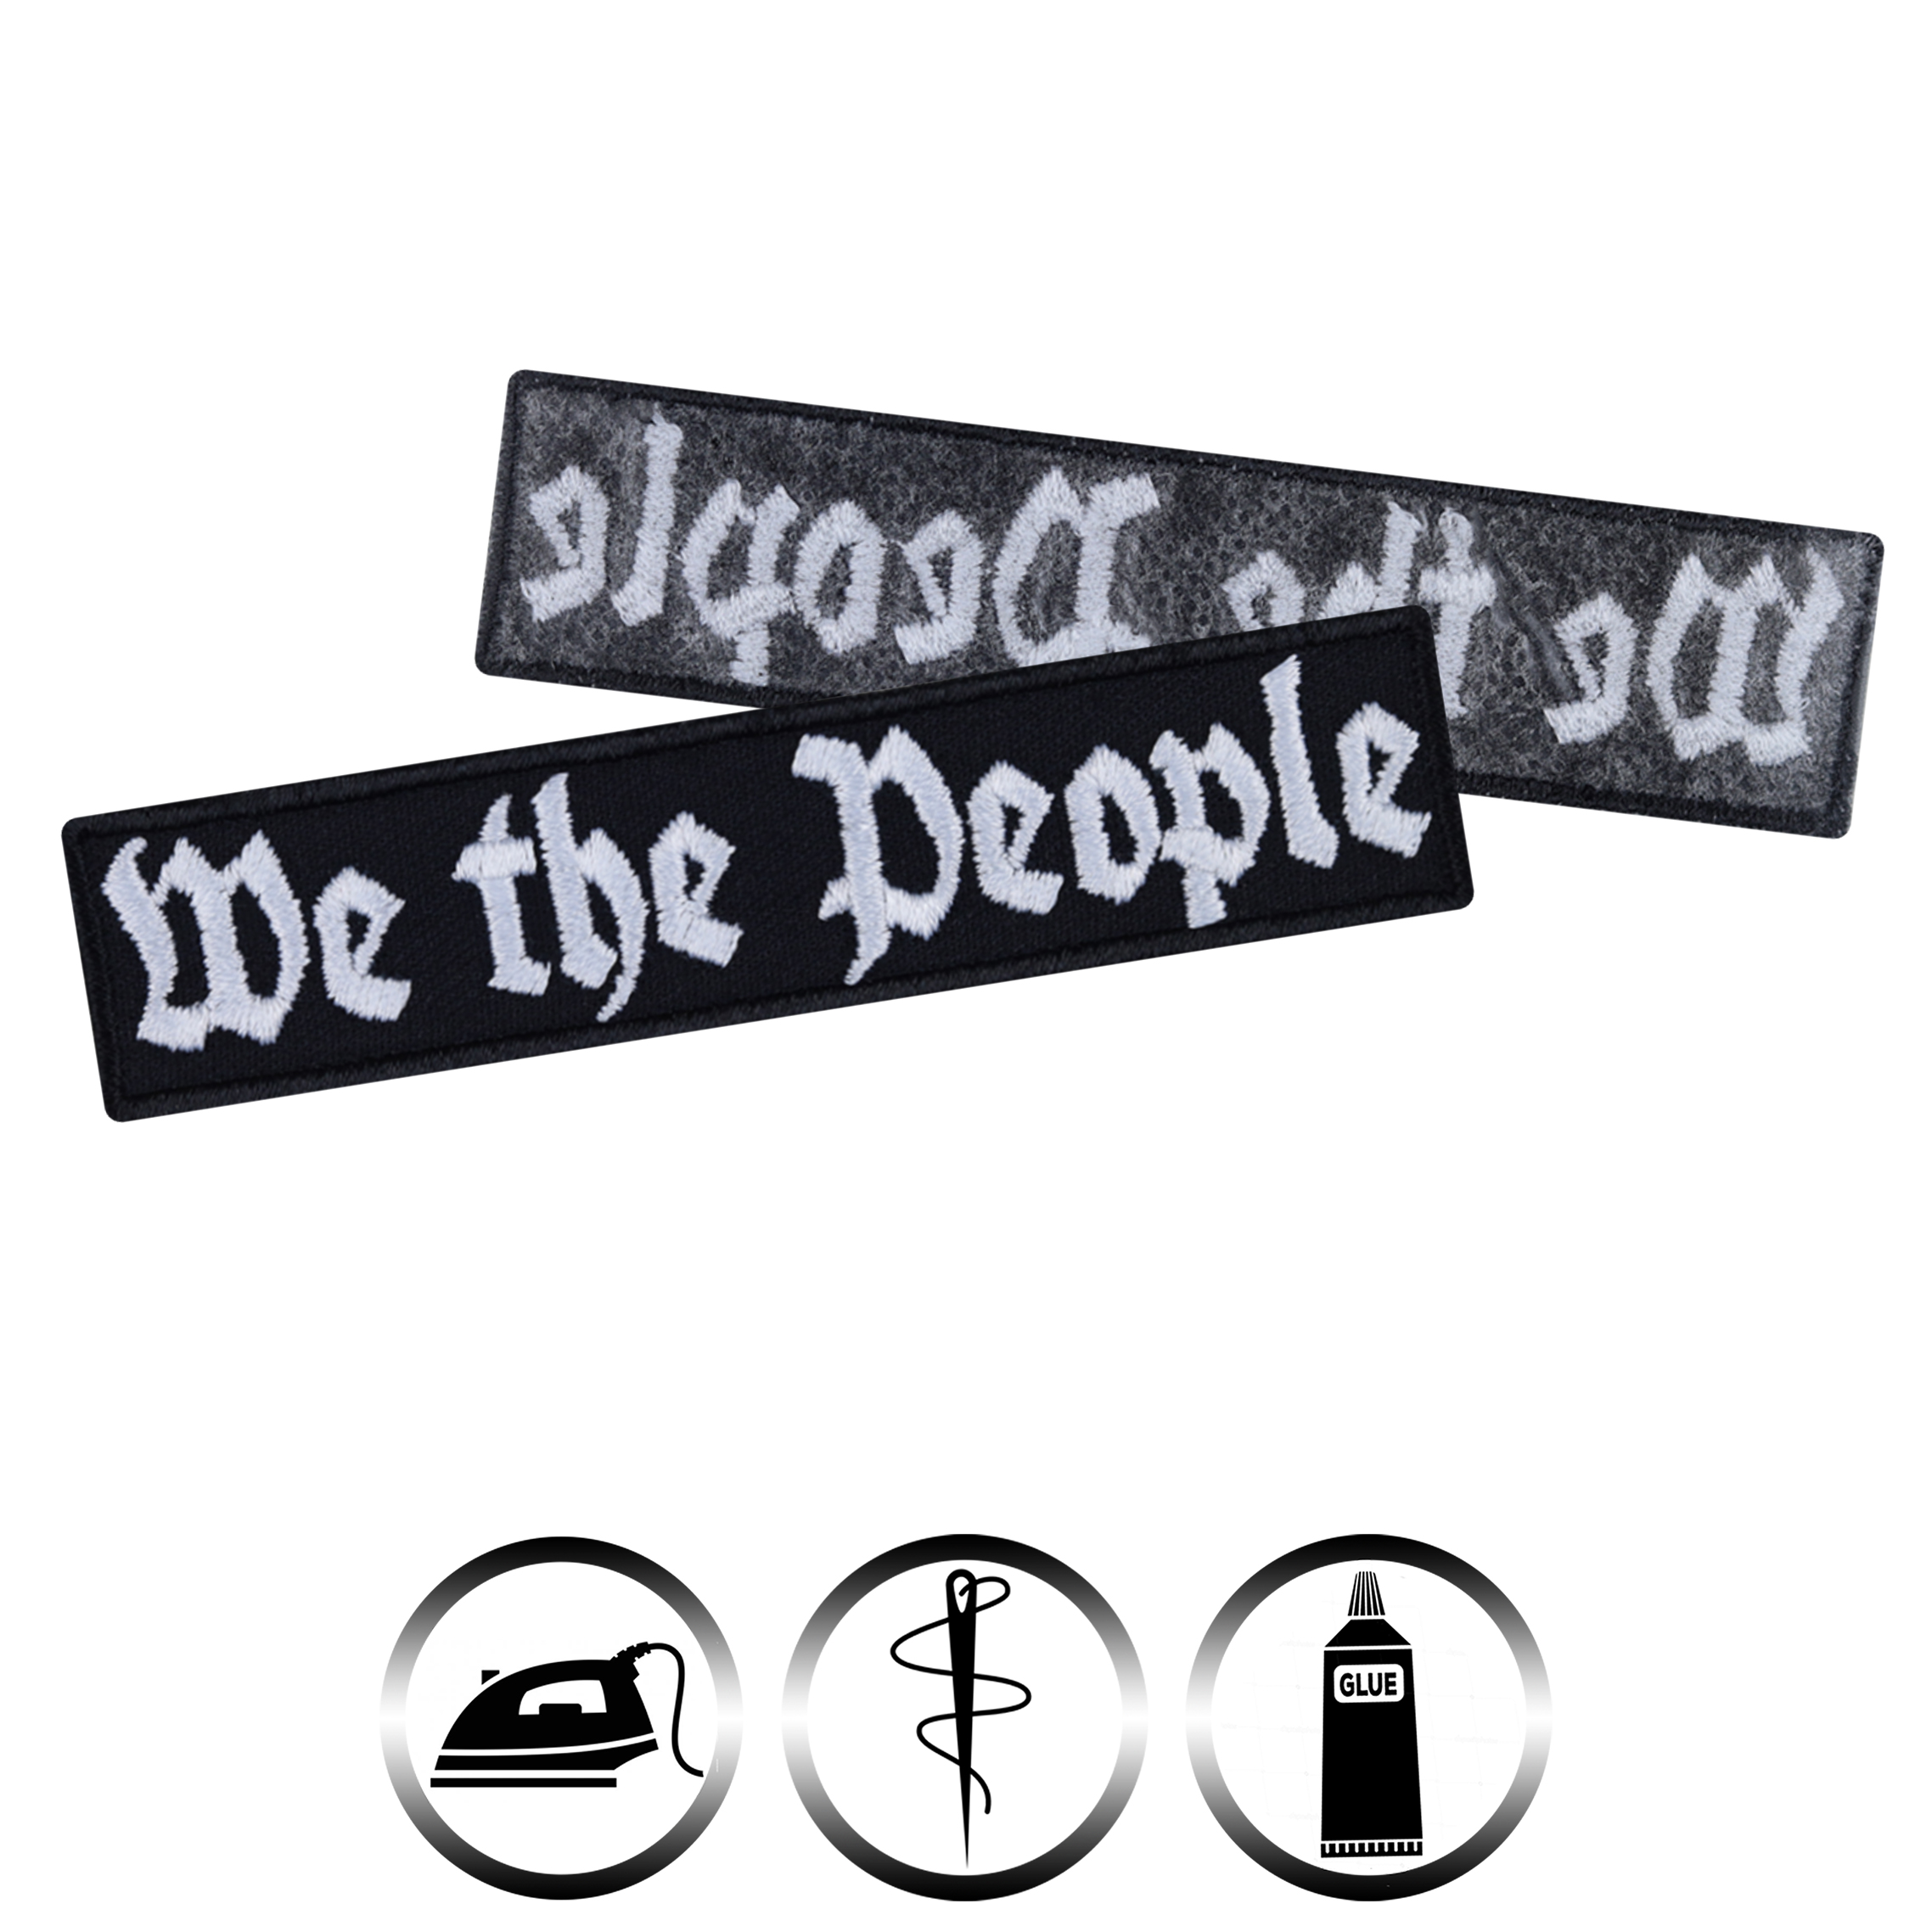 We the people - Patch